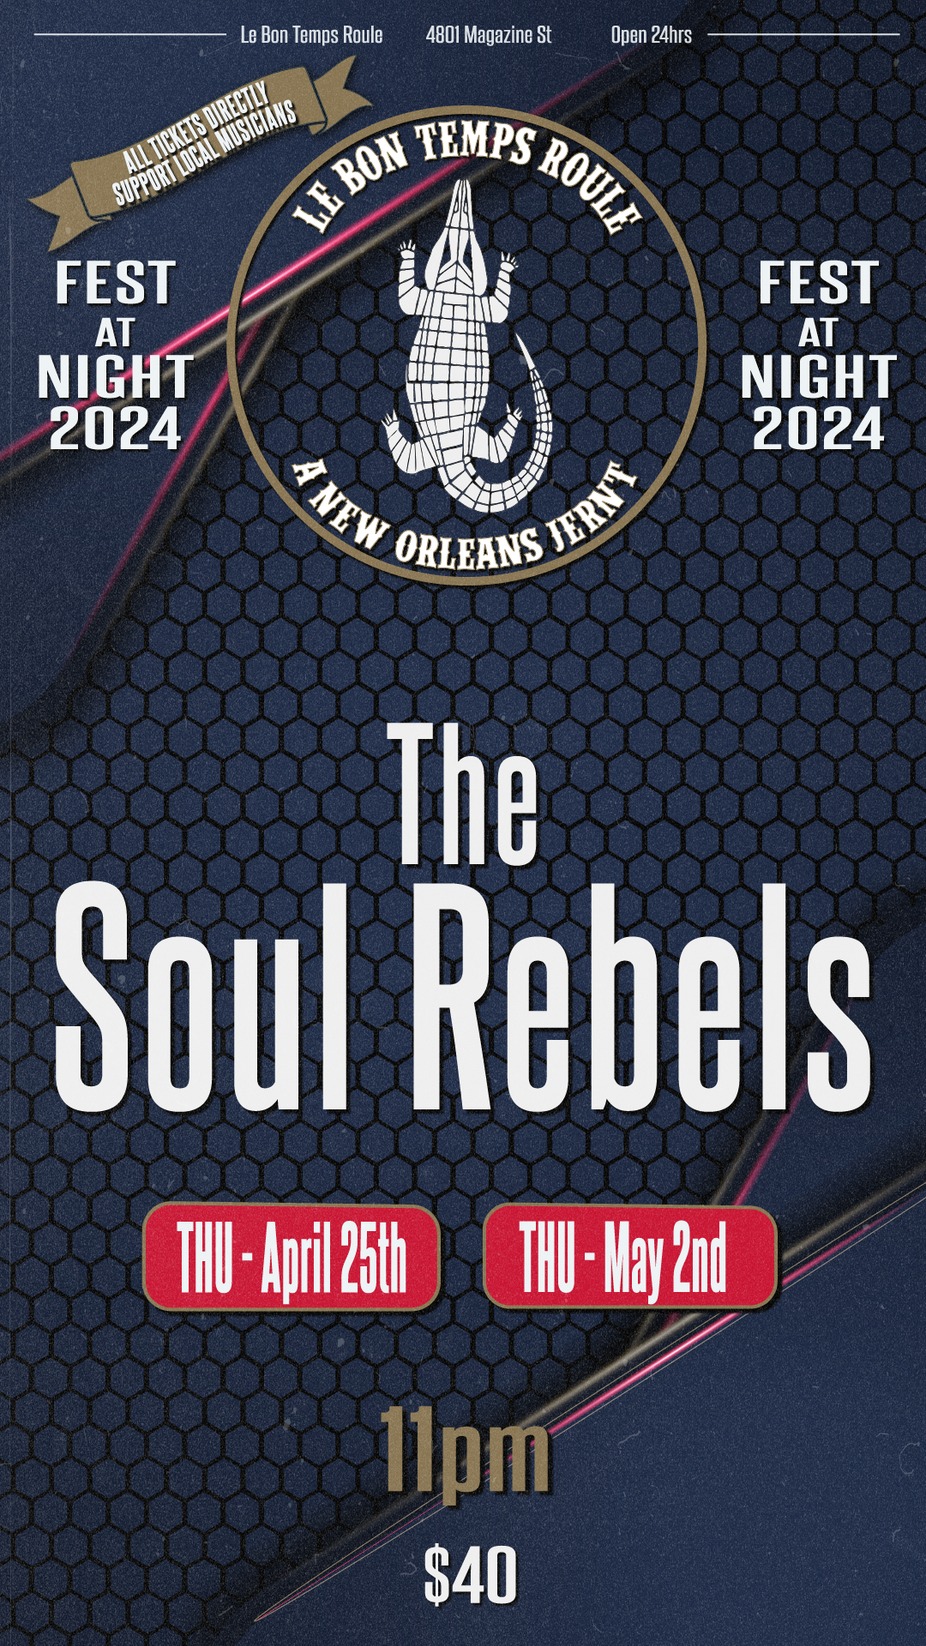 The Soul Rebels event photo